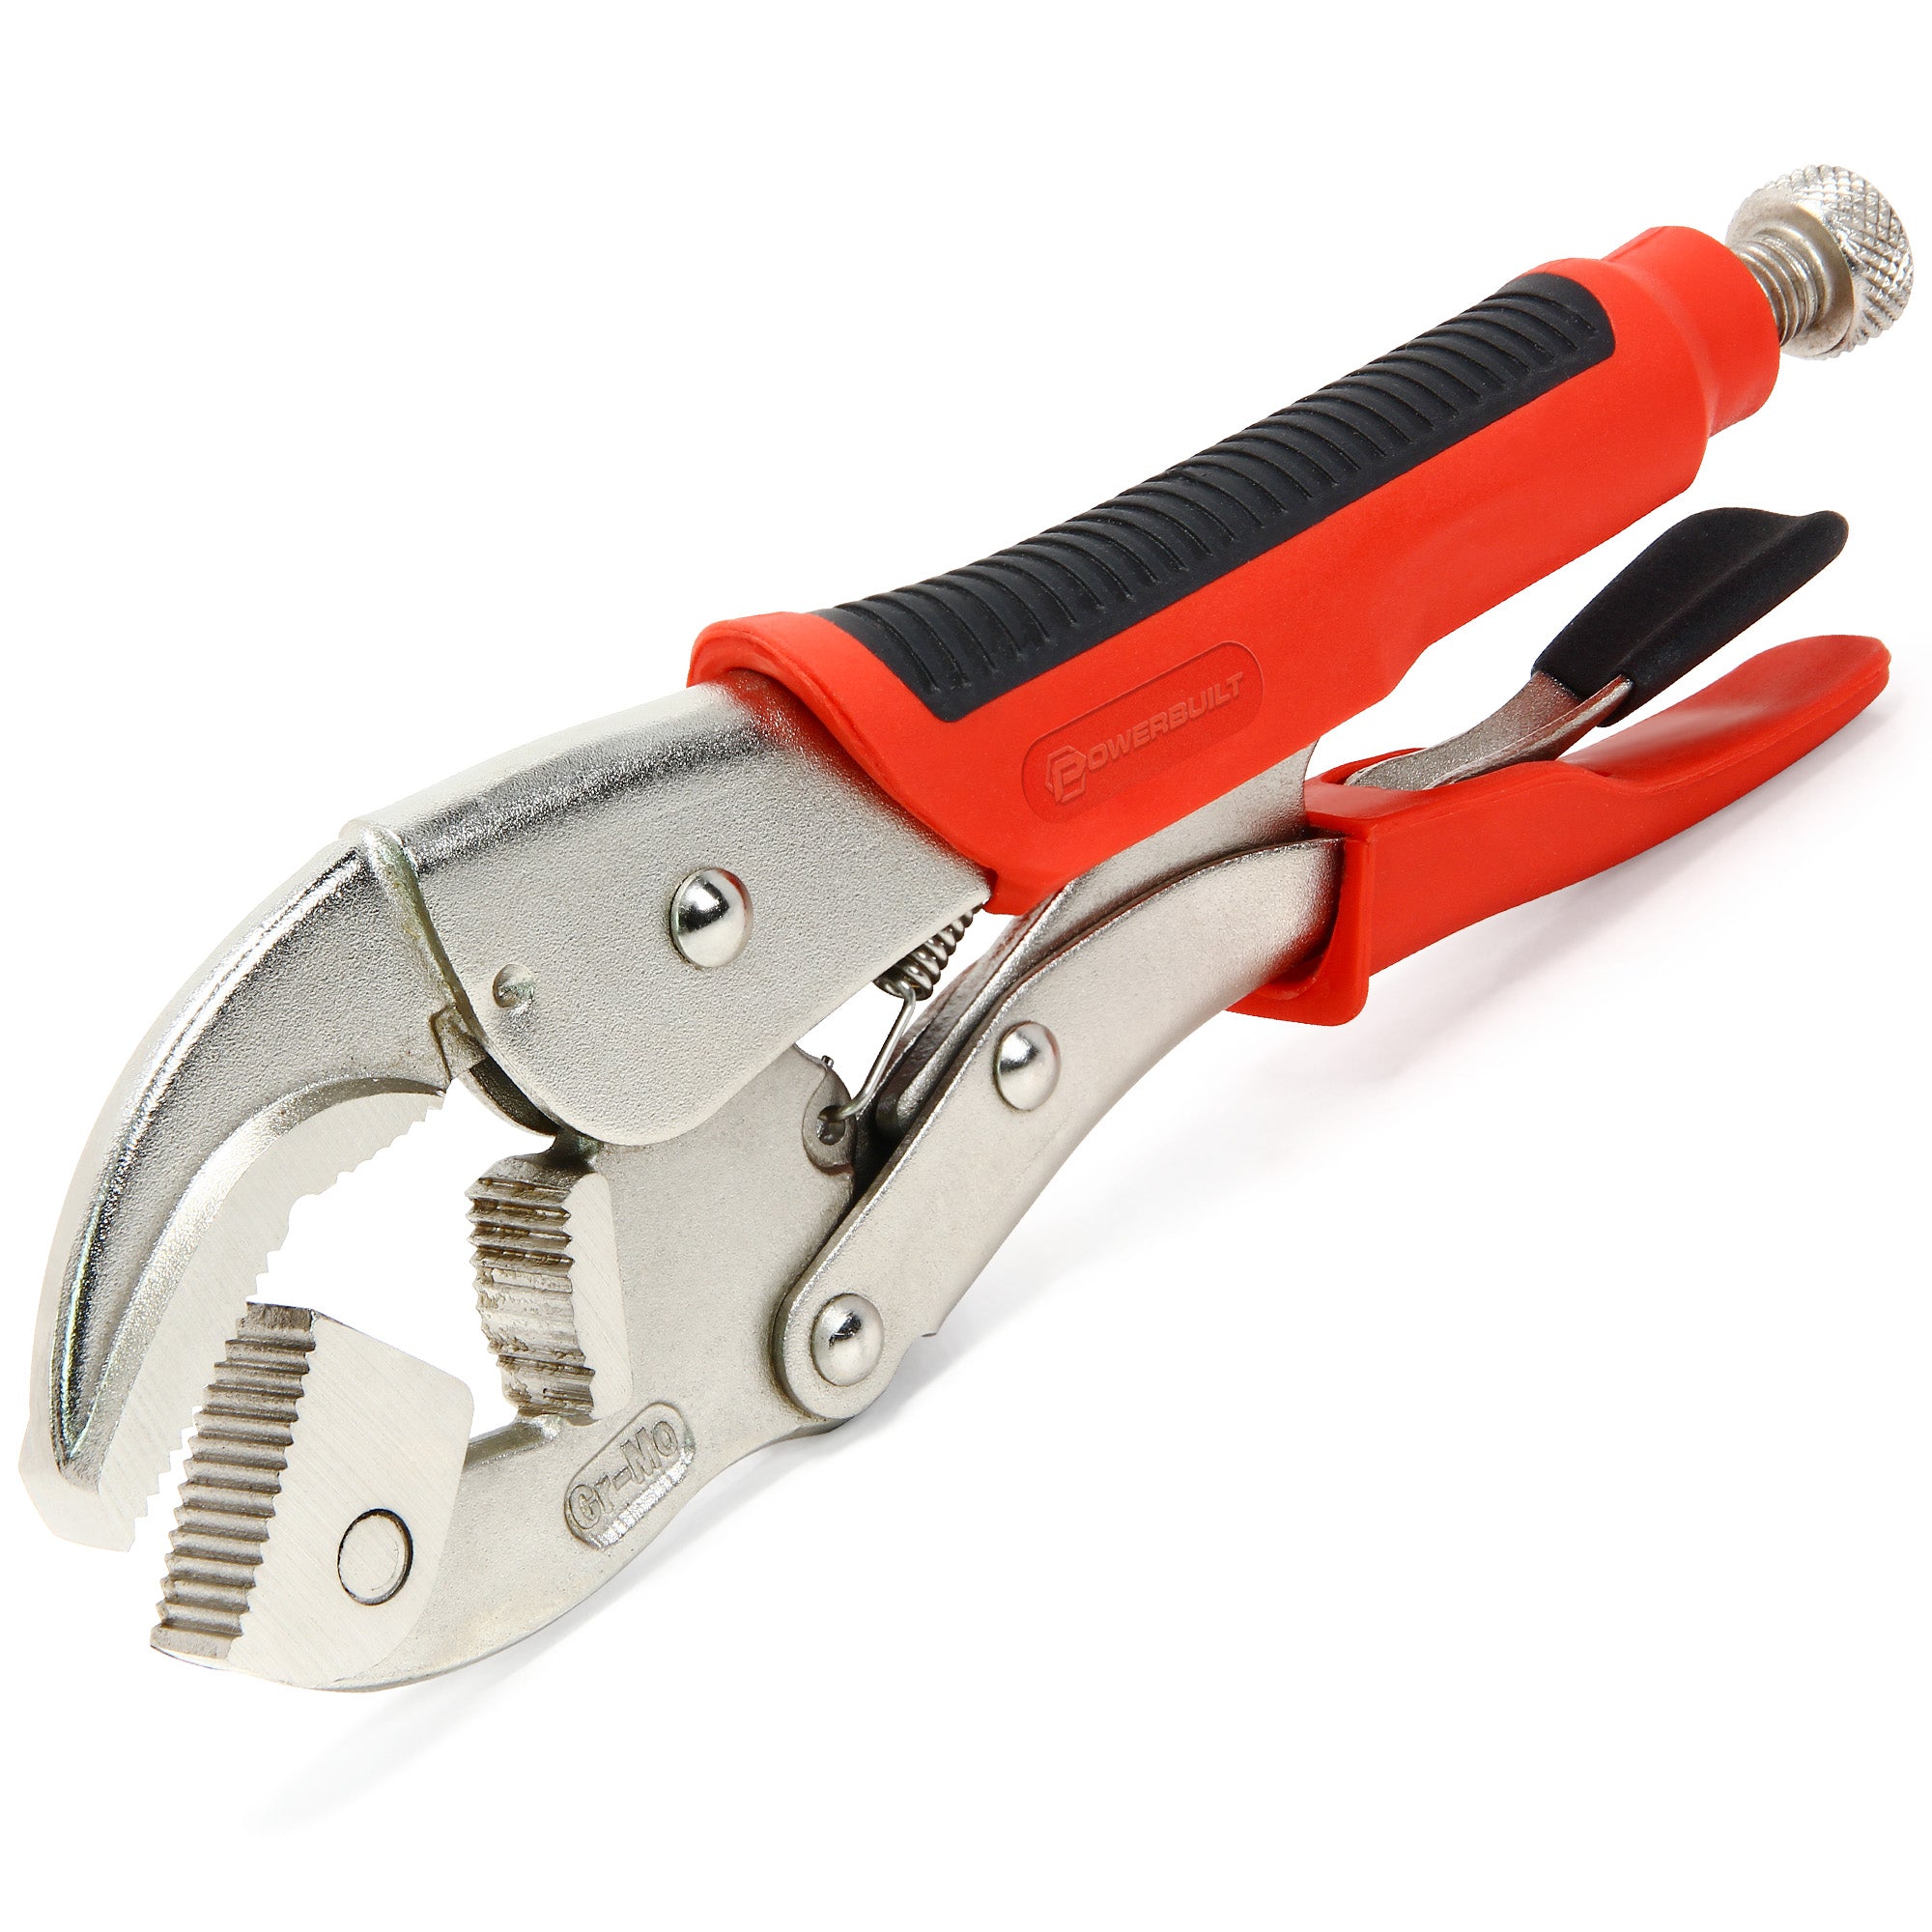 Knipex 10 in. Pivoting Grip Pliers